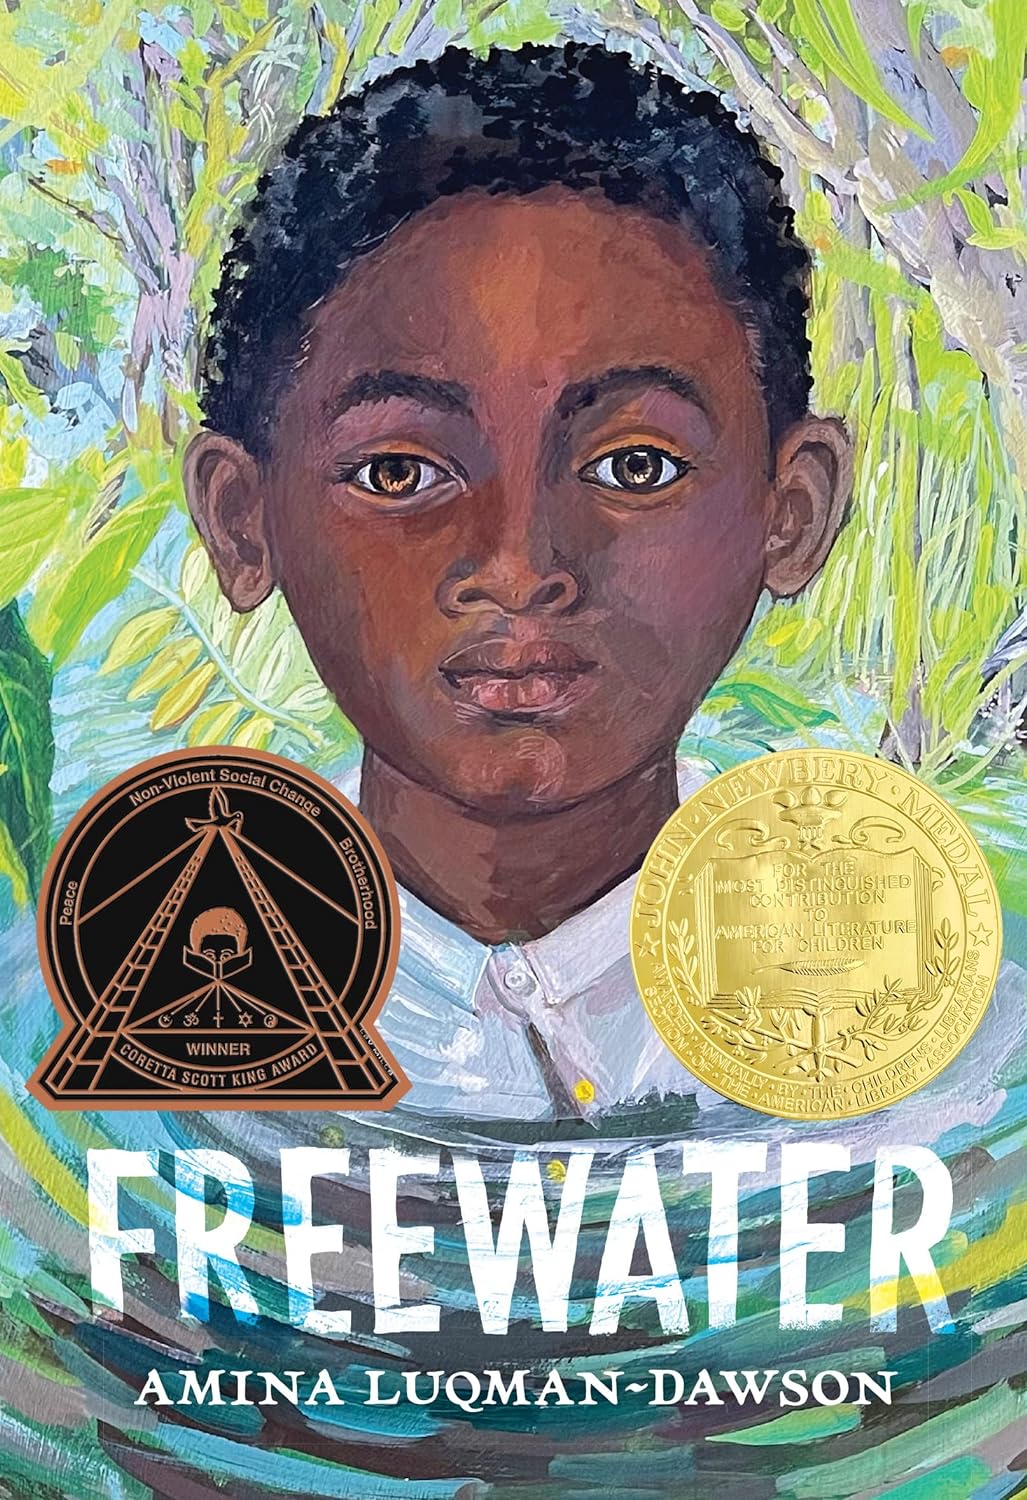 Book cover for the book, Freewater, by Amina Luqman-Dawson